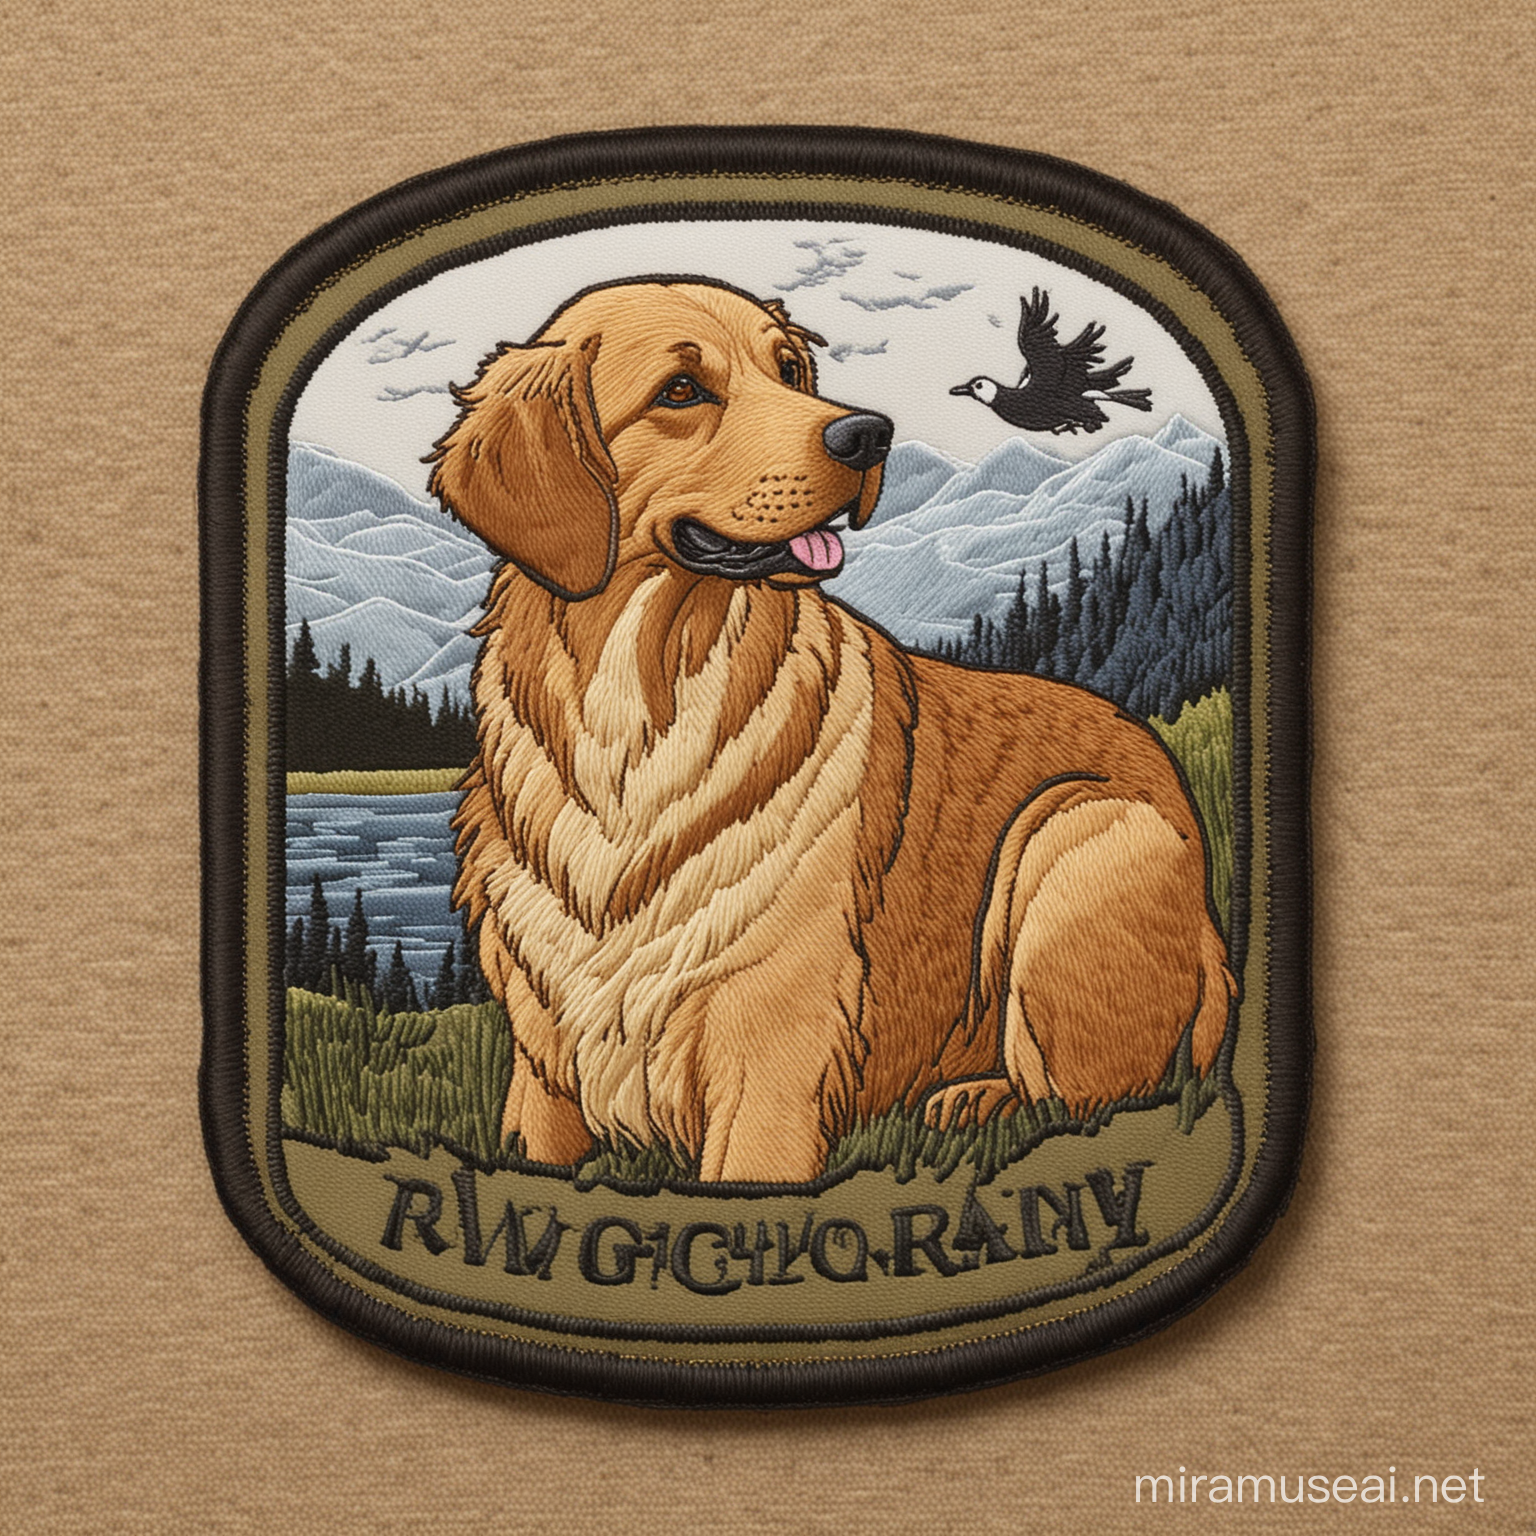 An embroidered patch, a hunting dog, golden retriever, with a Canada goose, text that says “Rex”, cartoon style, thick lines, low detail, no shading -- ar 9:11 --v5